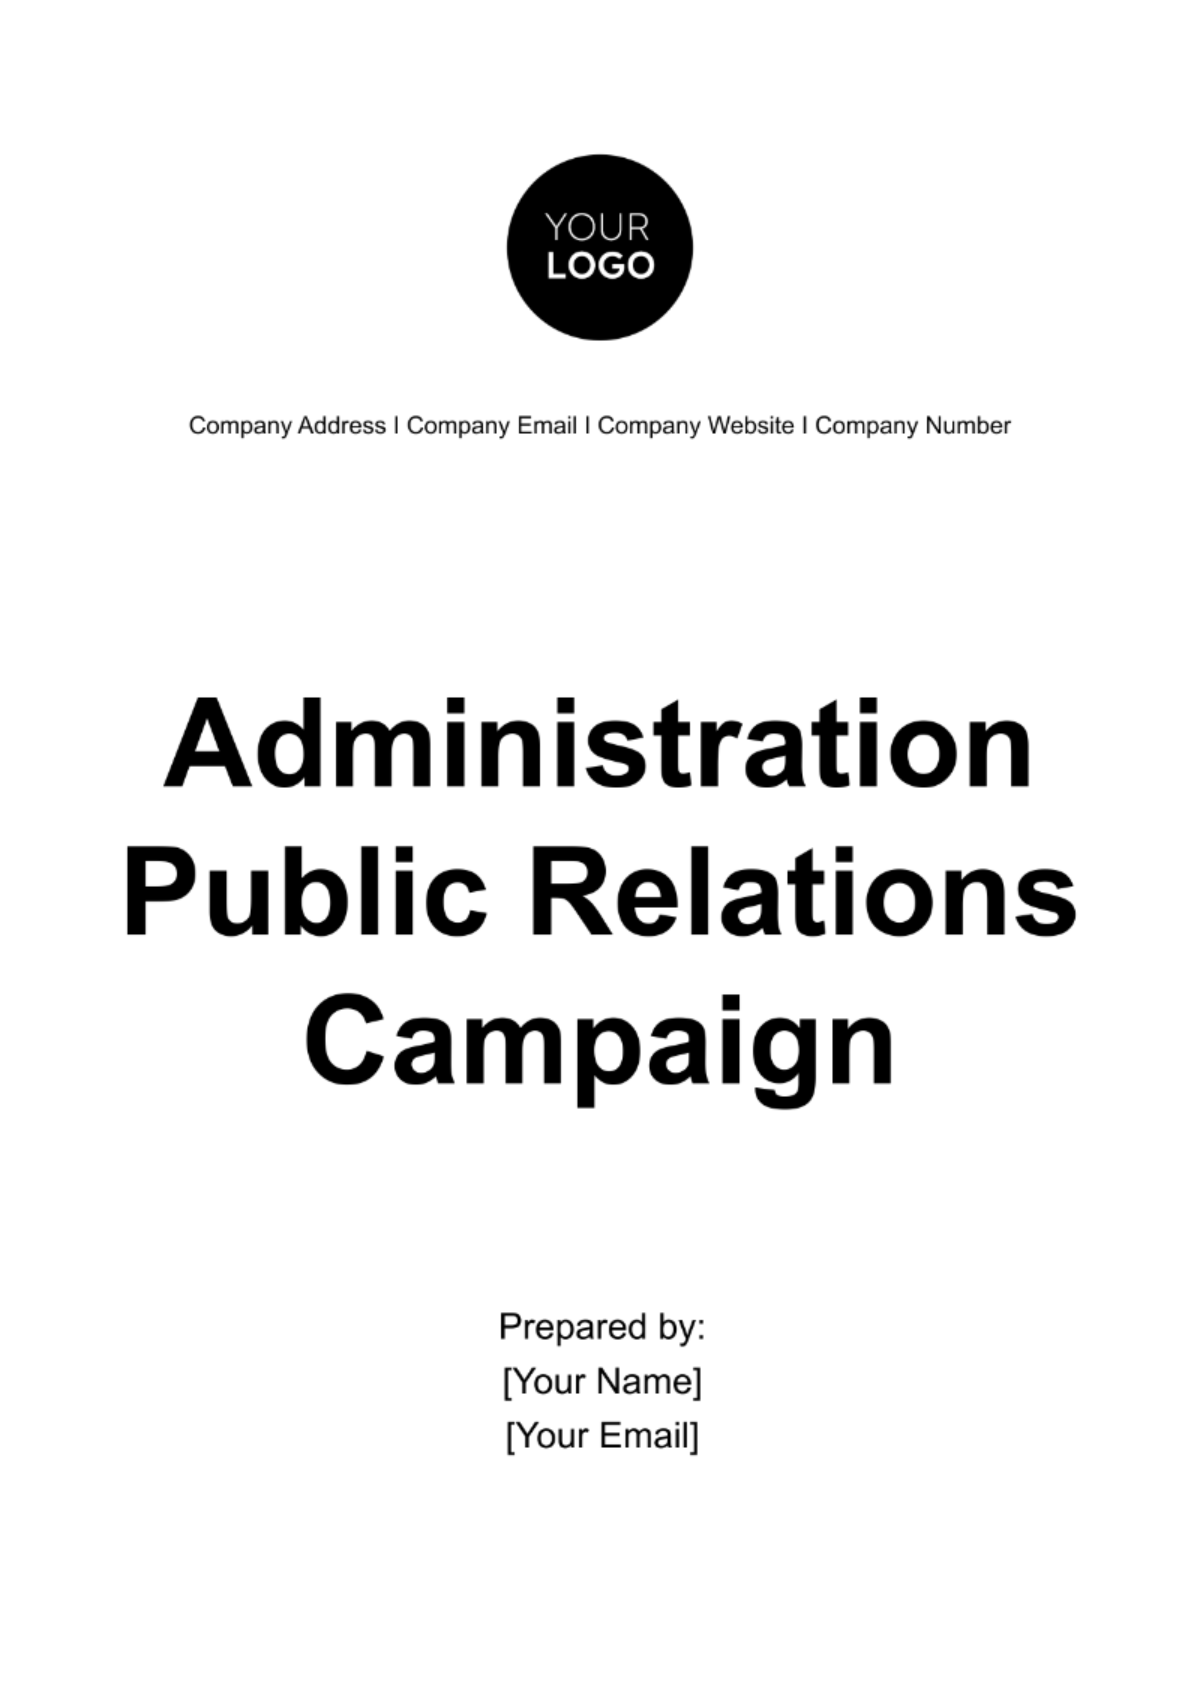 Administration Public Relations Campaign Template